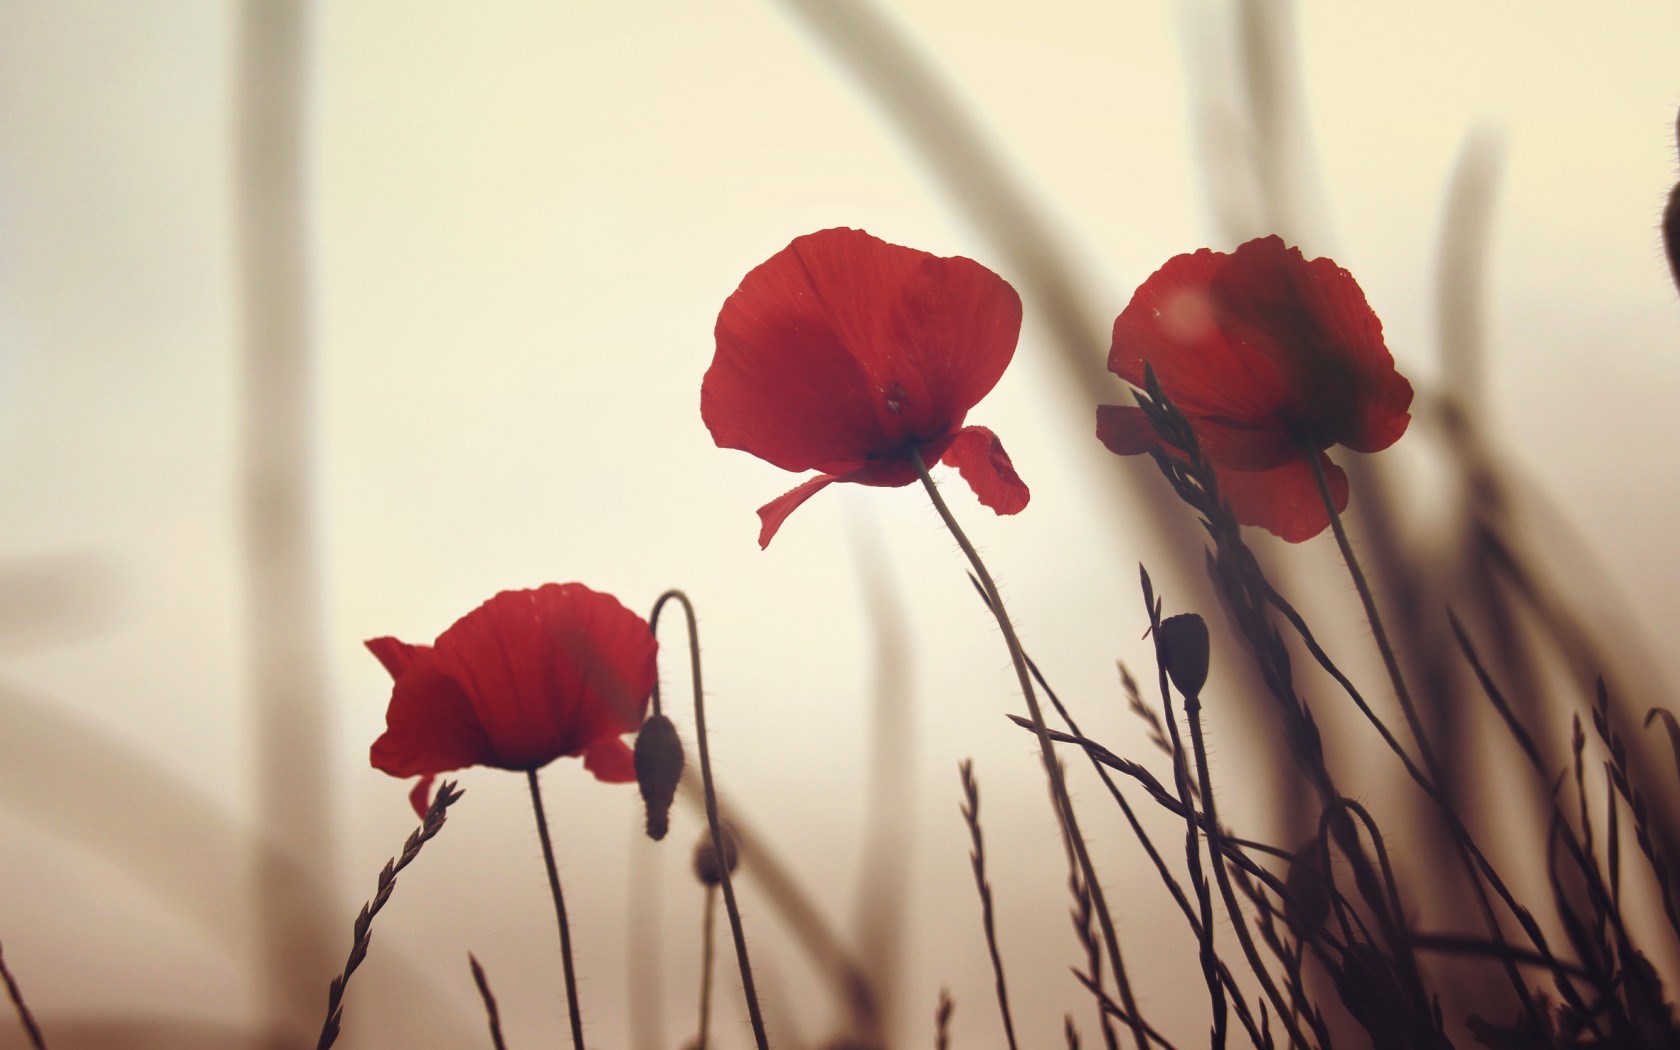 Poppy Flowers Wallpapers posted by John Anderson